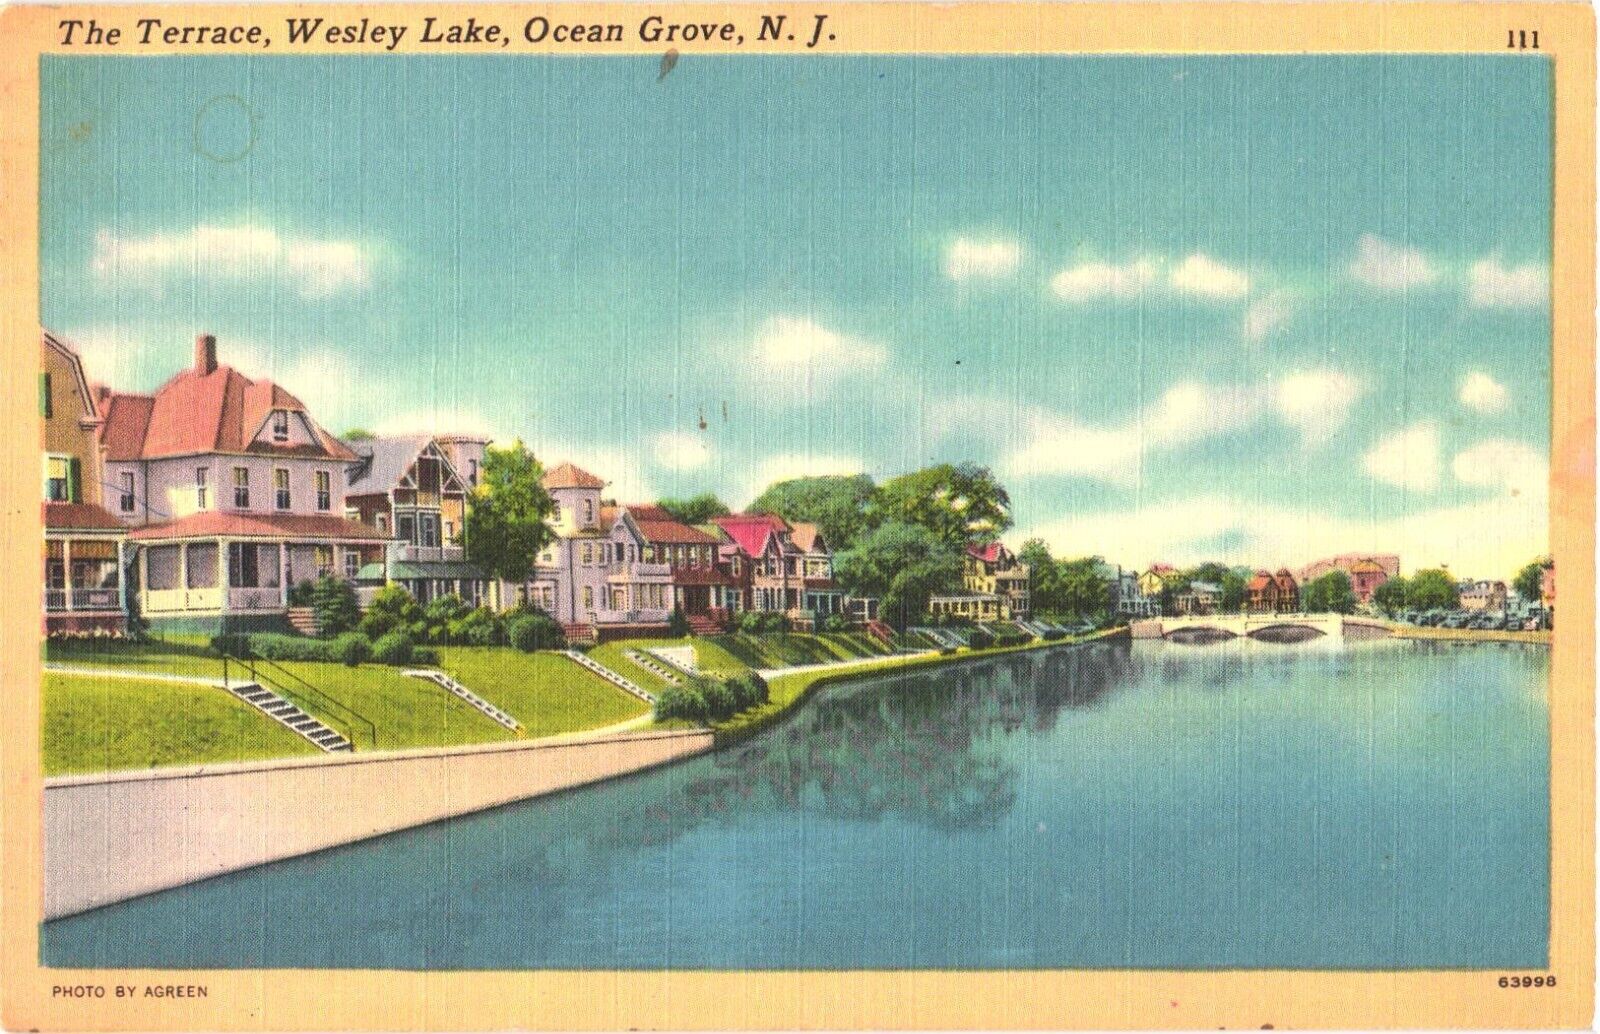 Picturesque View of The Terrace, Wesley Lake, Ocean Grove, New Jersey Postcard